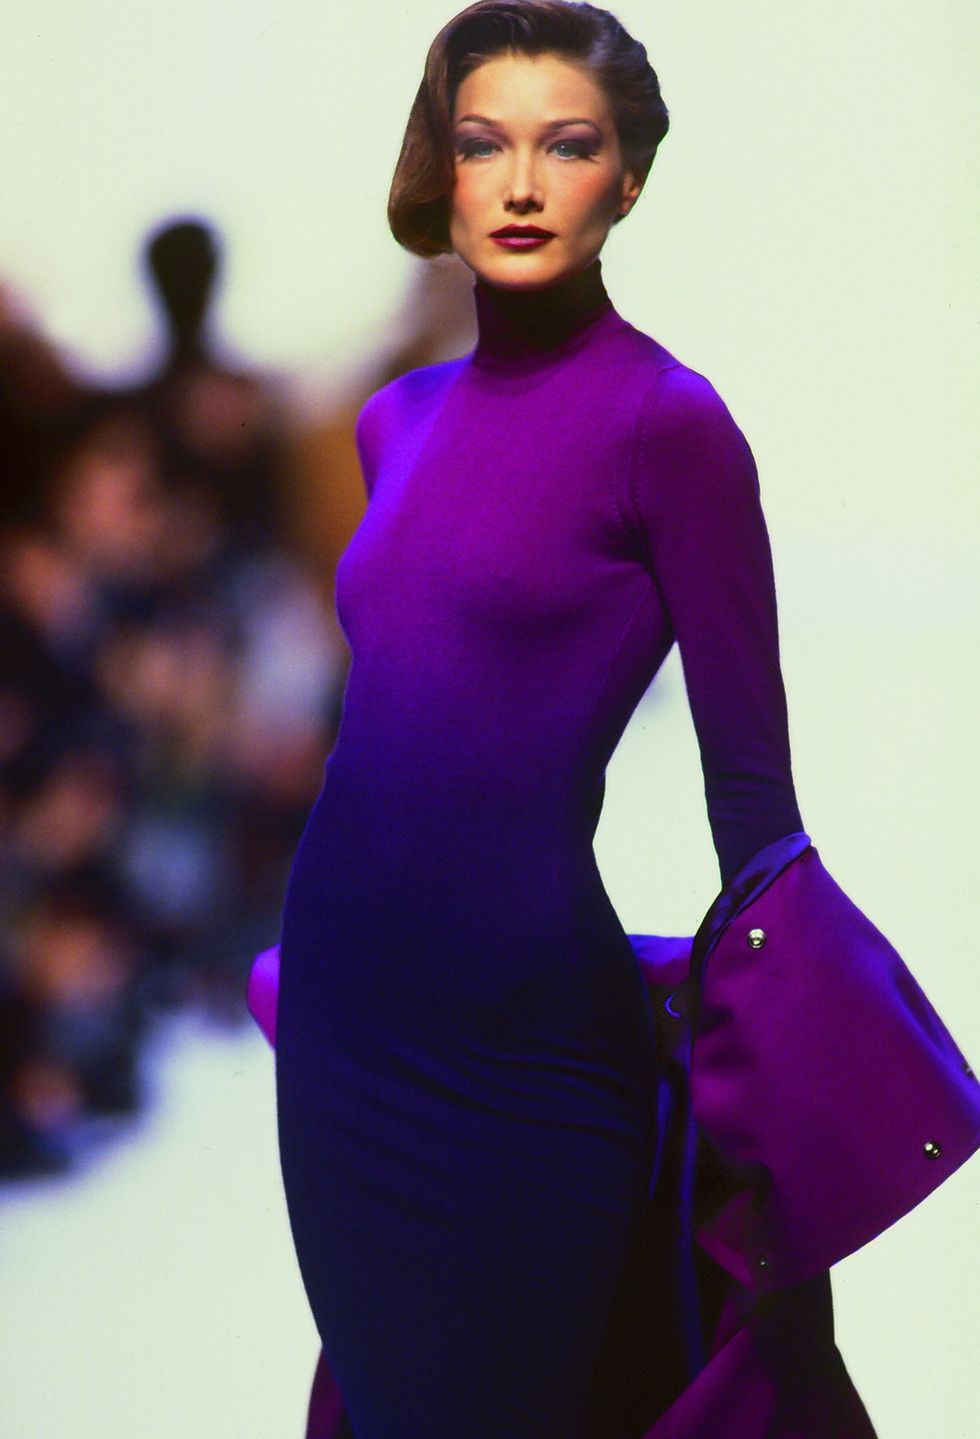 The List of Famous 90s Supermodels That Dominated 90s Fashion